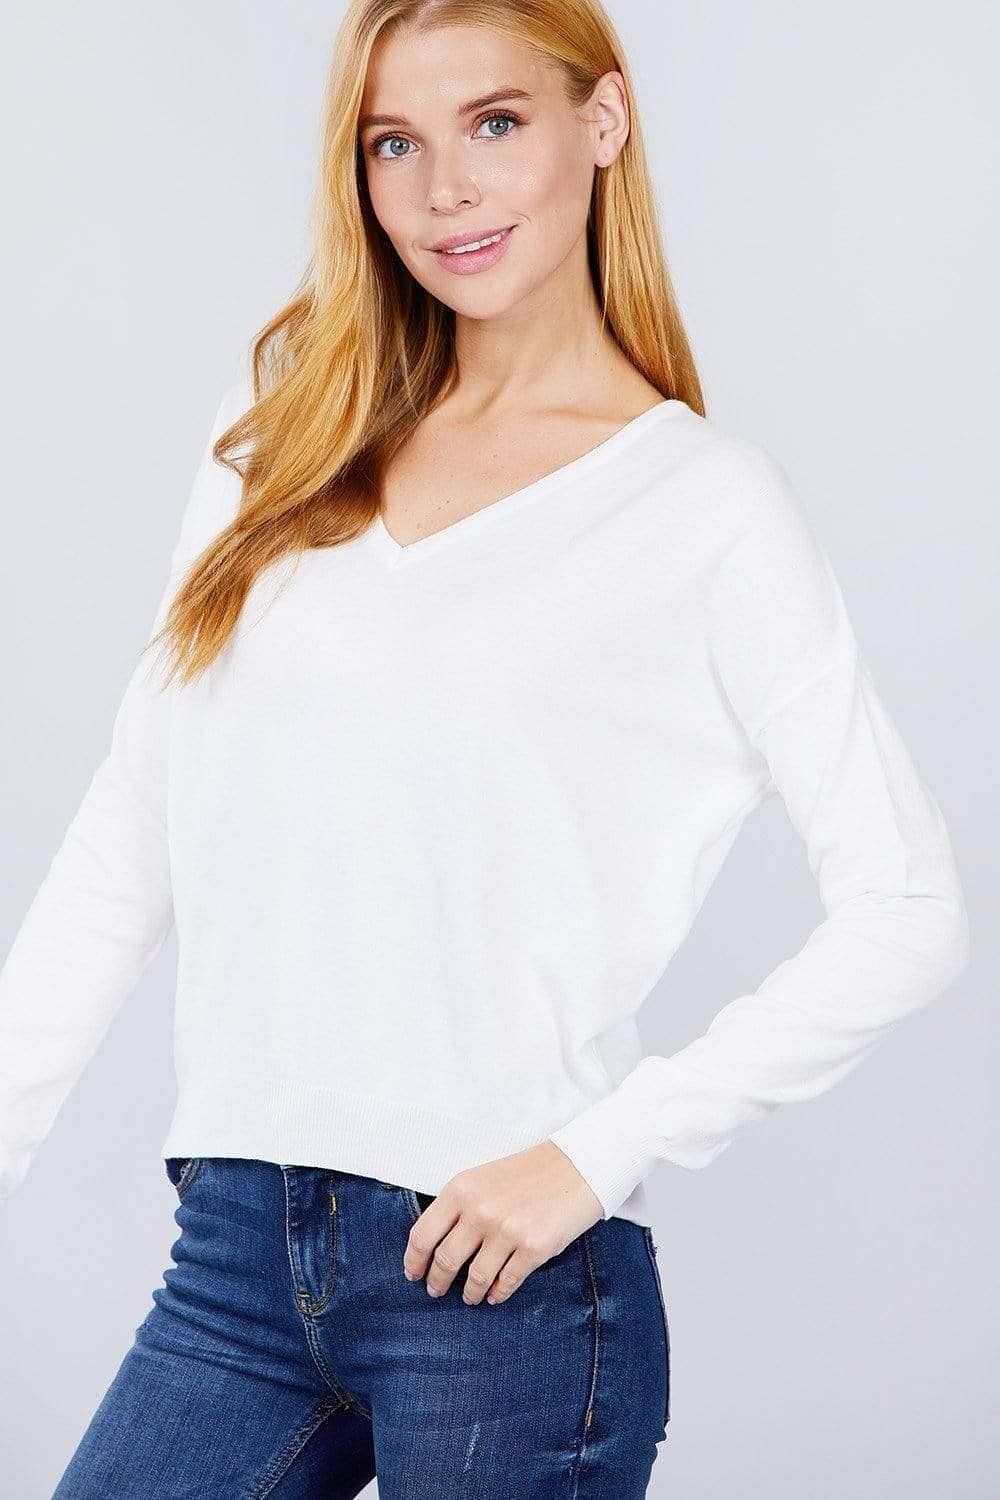 White Long Sleeve V-Neck Pullover Sweater - Shopping Therapy, LLC Sweater